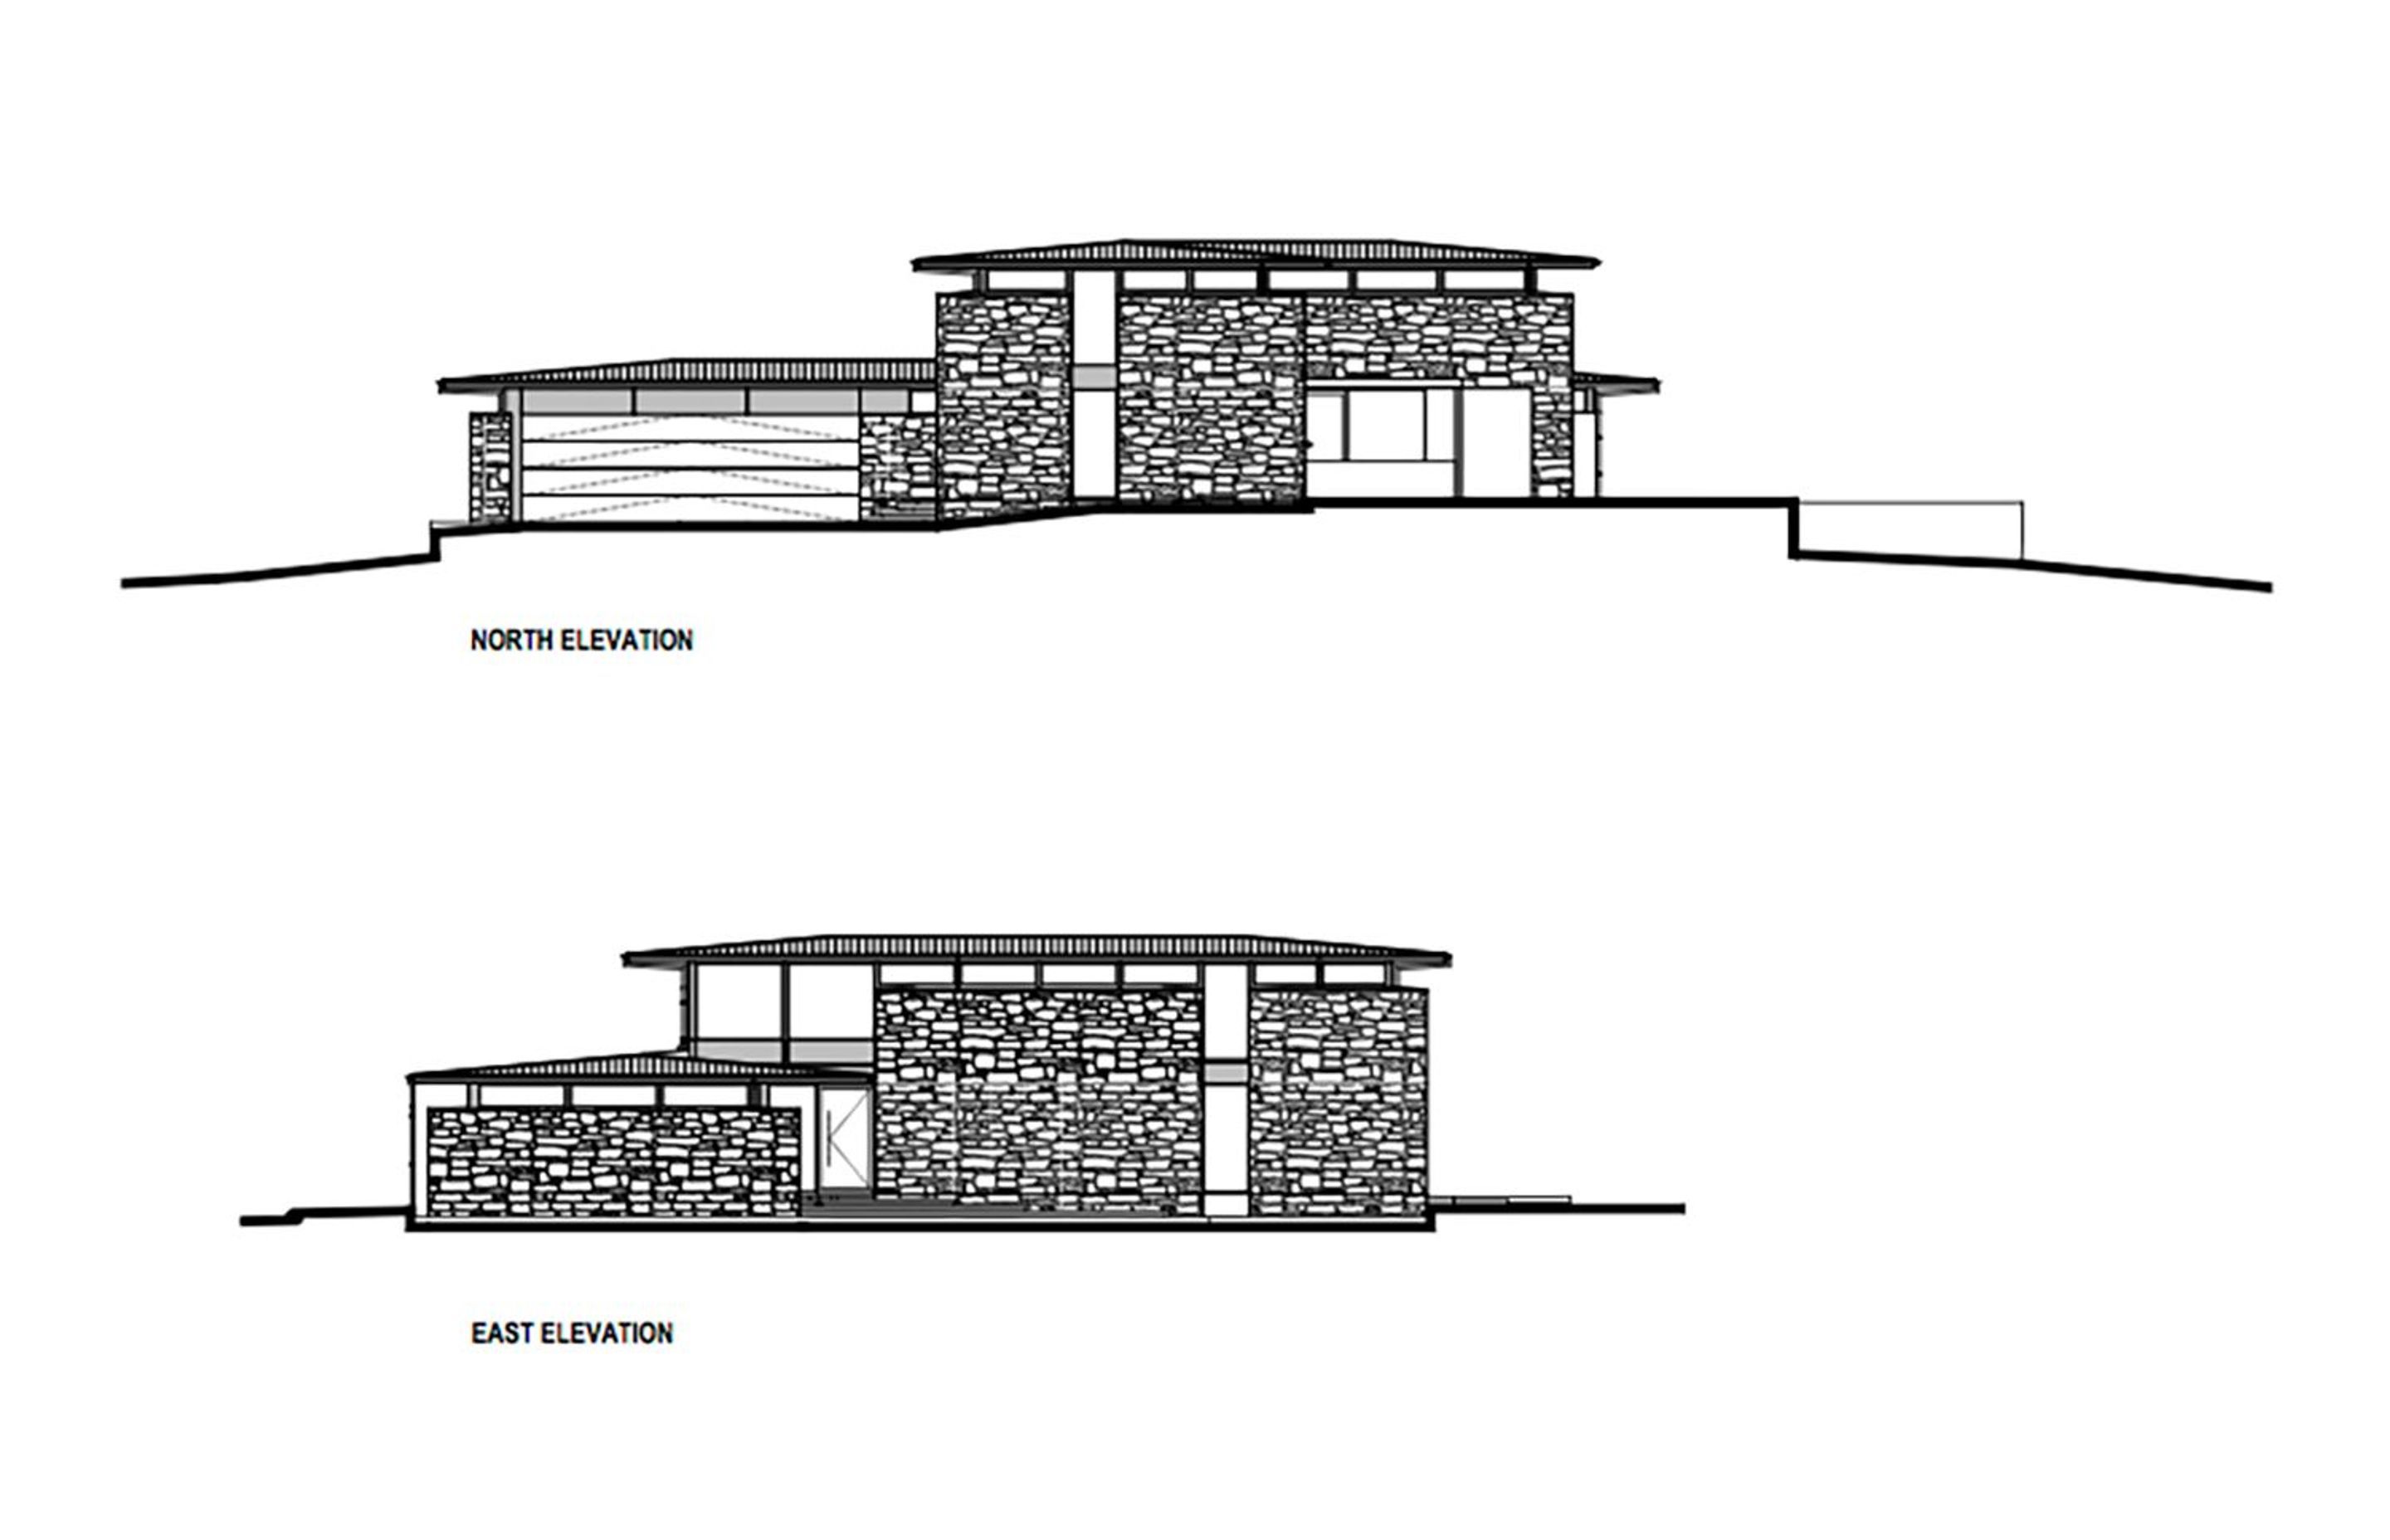 Nau Mai north and east-facing elevations by O'Neil Architecture.